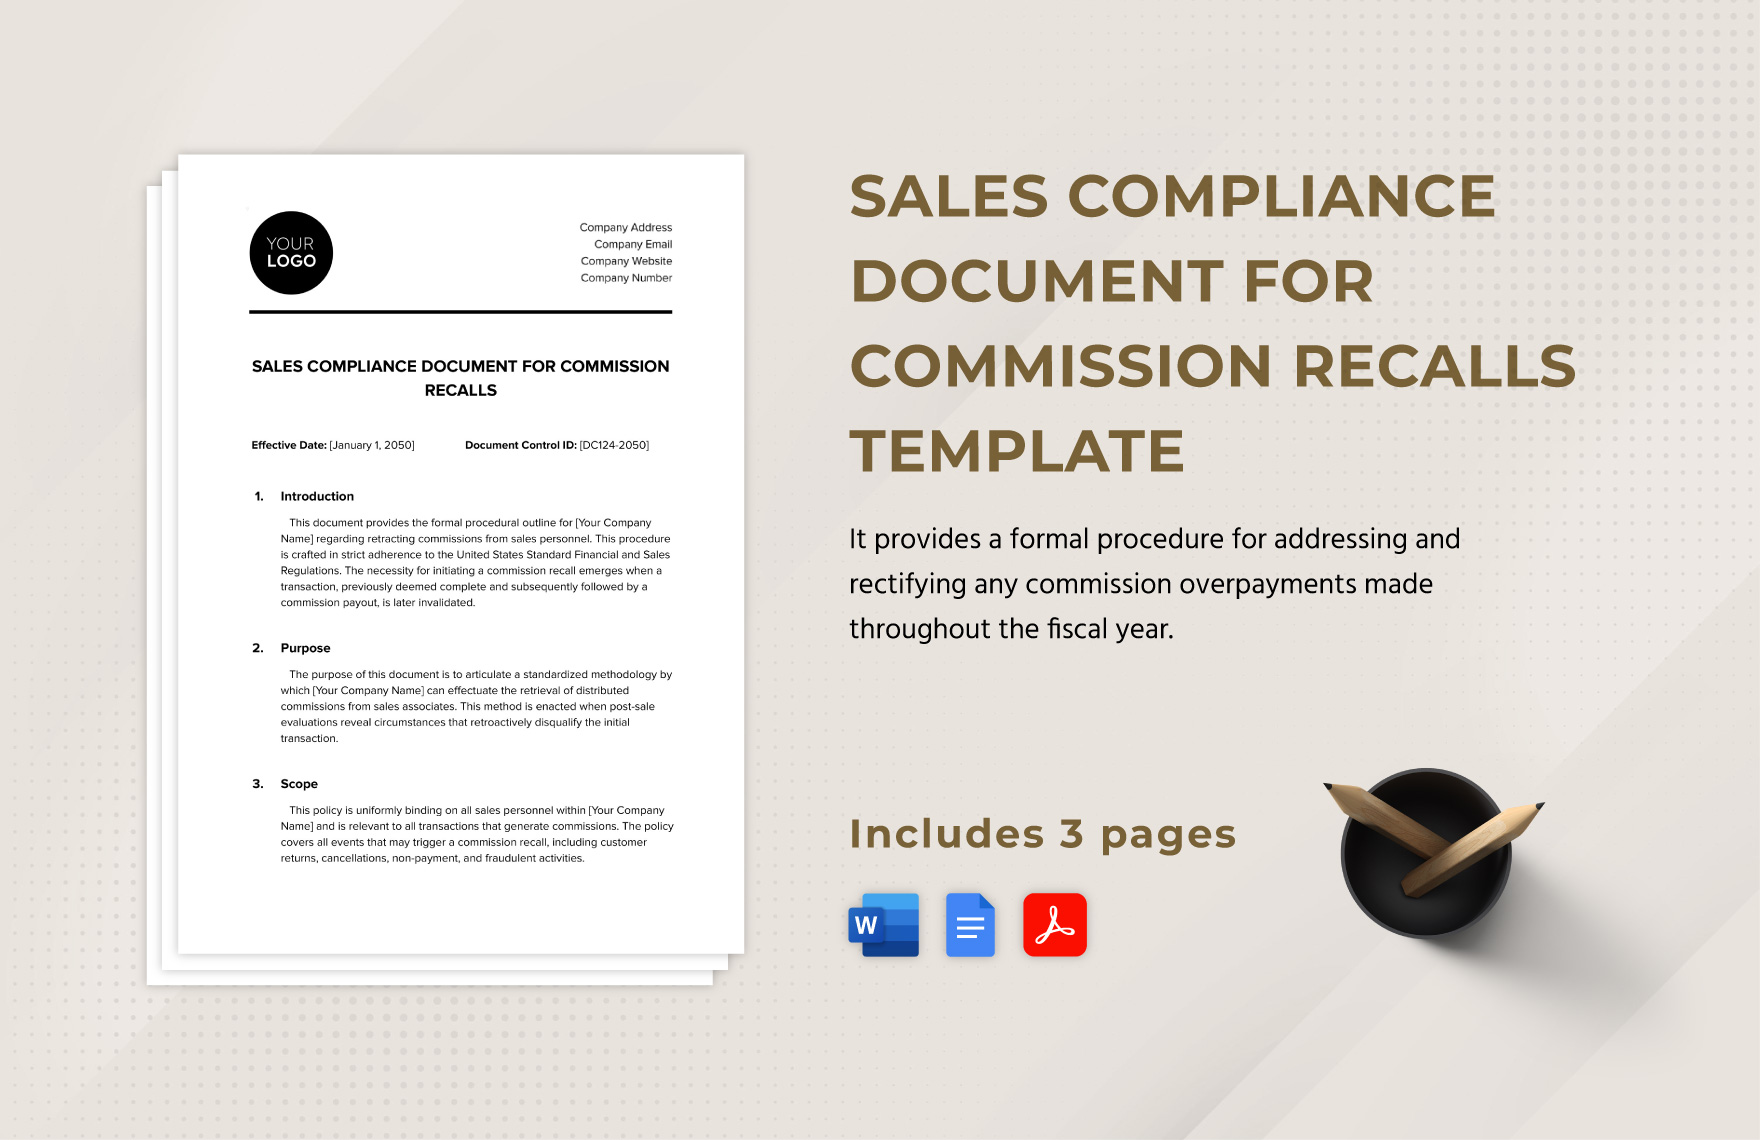 Sales Compliance Document for Commission Recalls Template